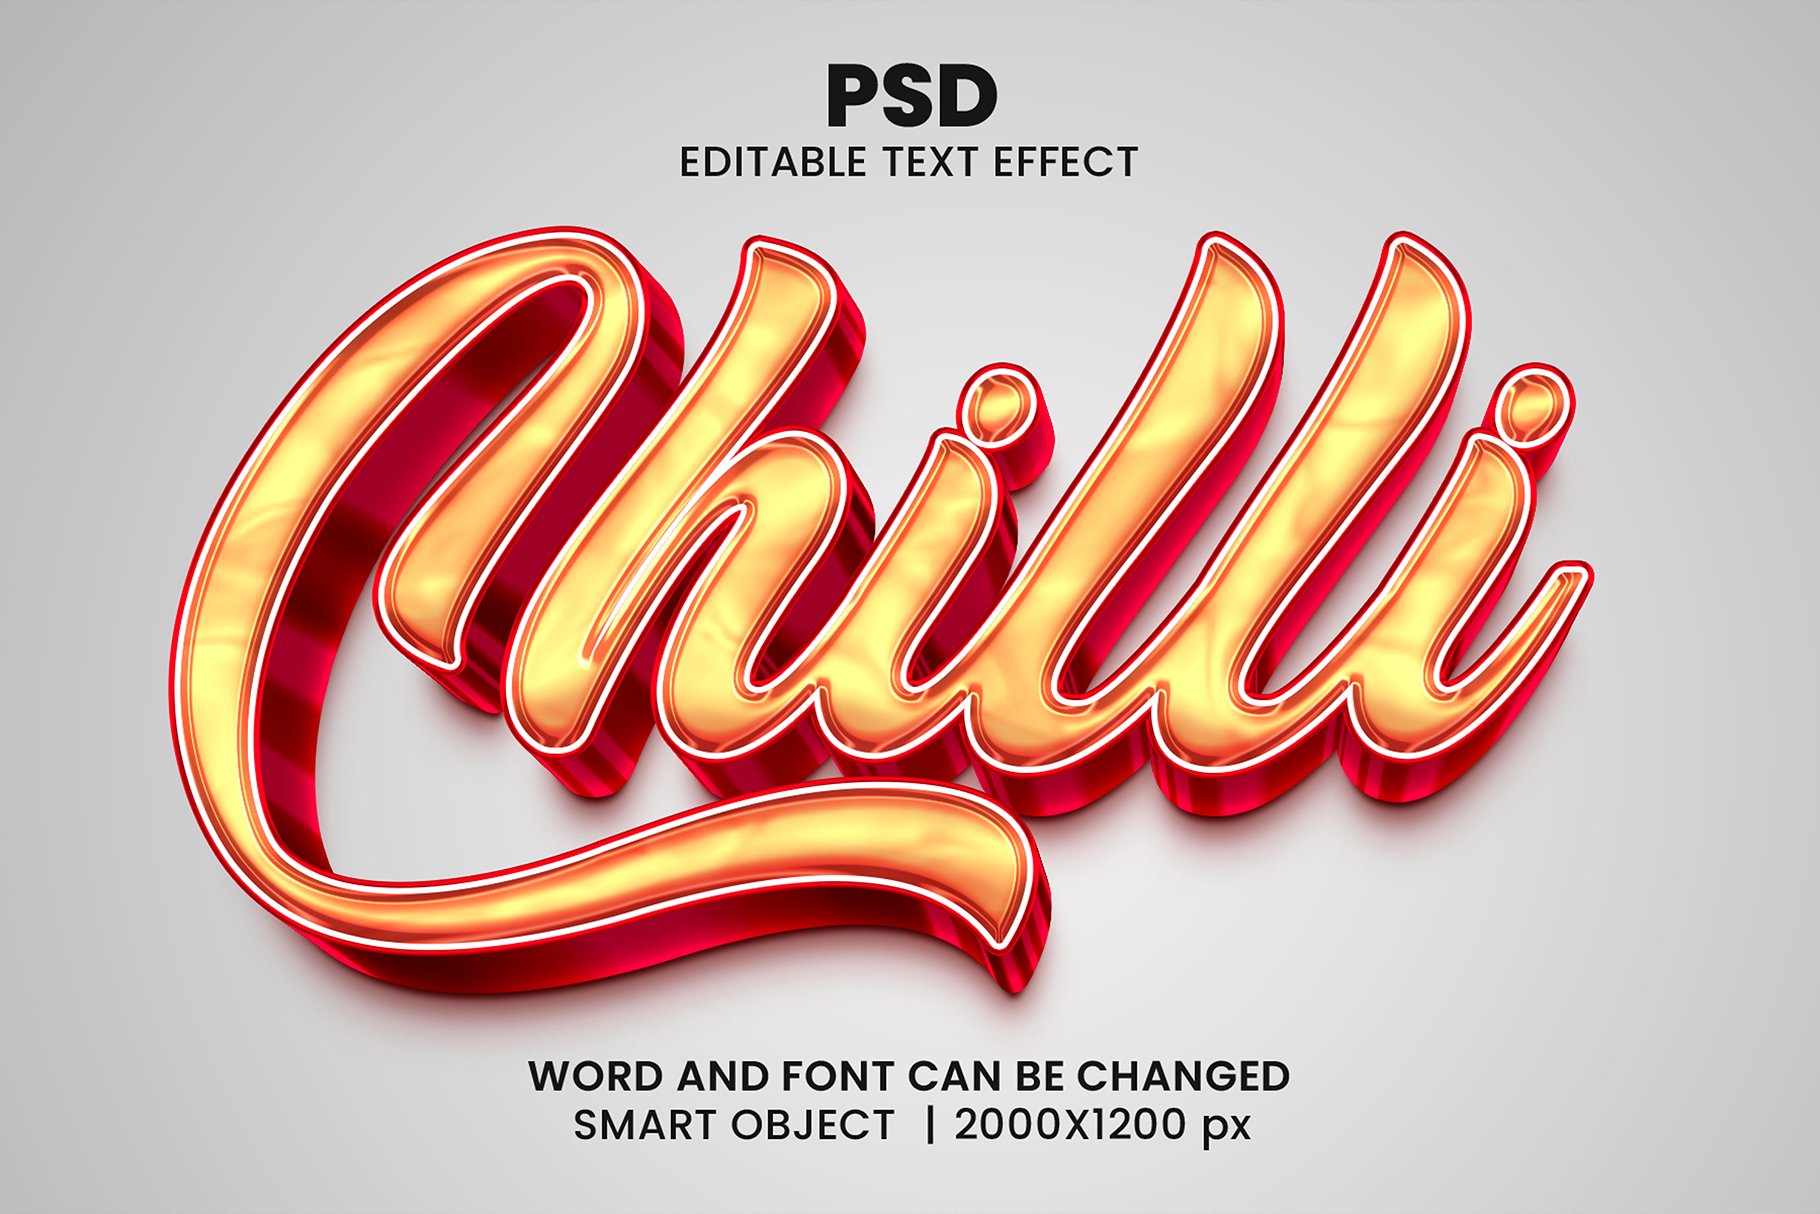 Chilli 3d Editable Psd Text Effectcover image.